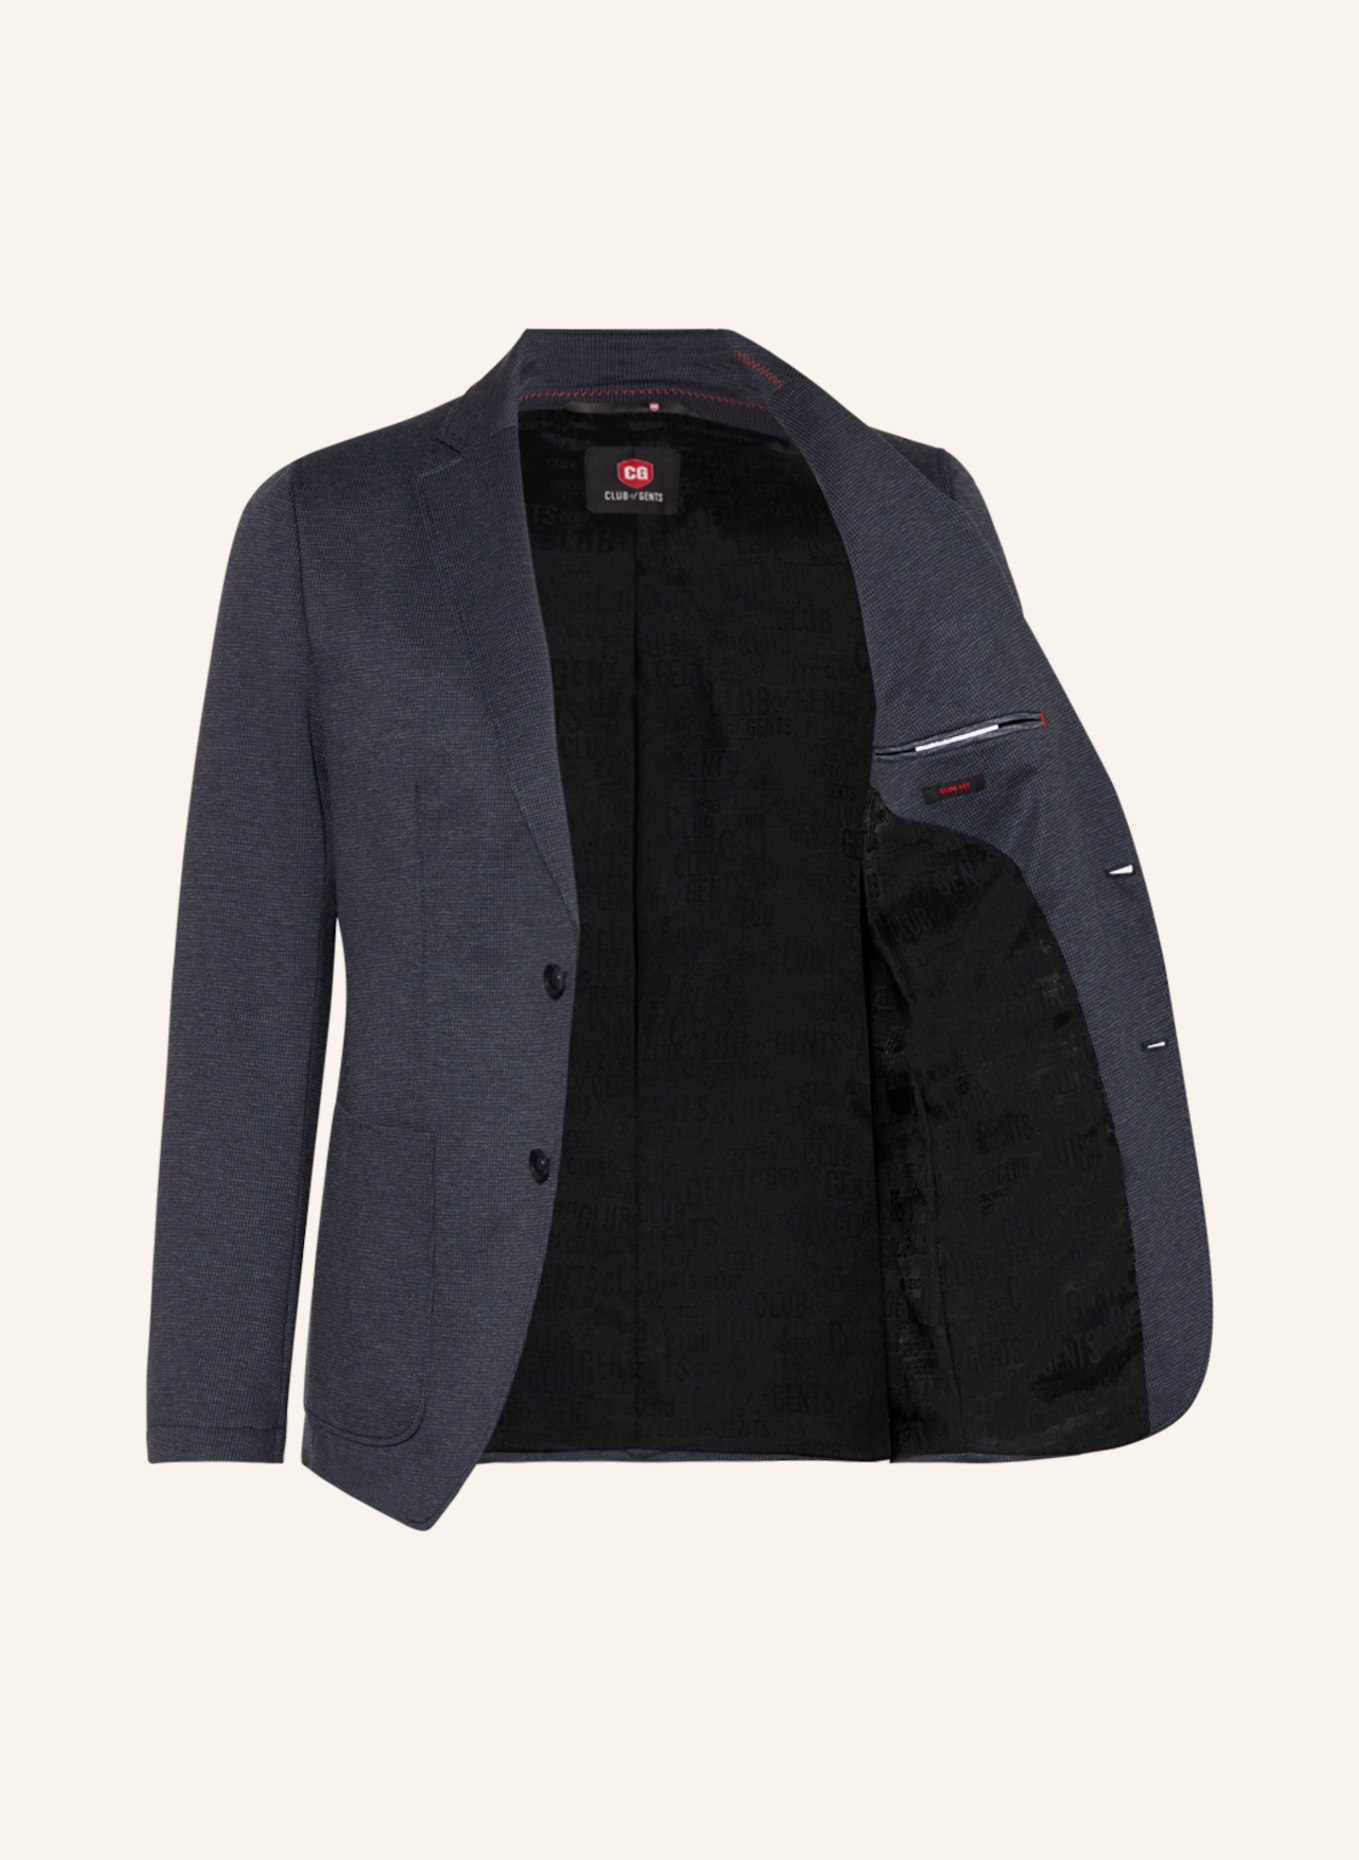 CG - CLUB of GENTS Suit jacket CUBA slim fit made of jersey, Color: 62 BLAU MITTEL (Image 4)